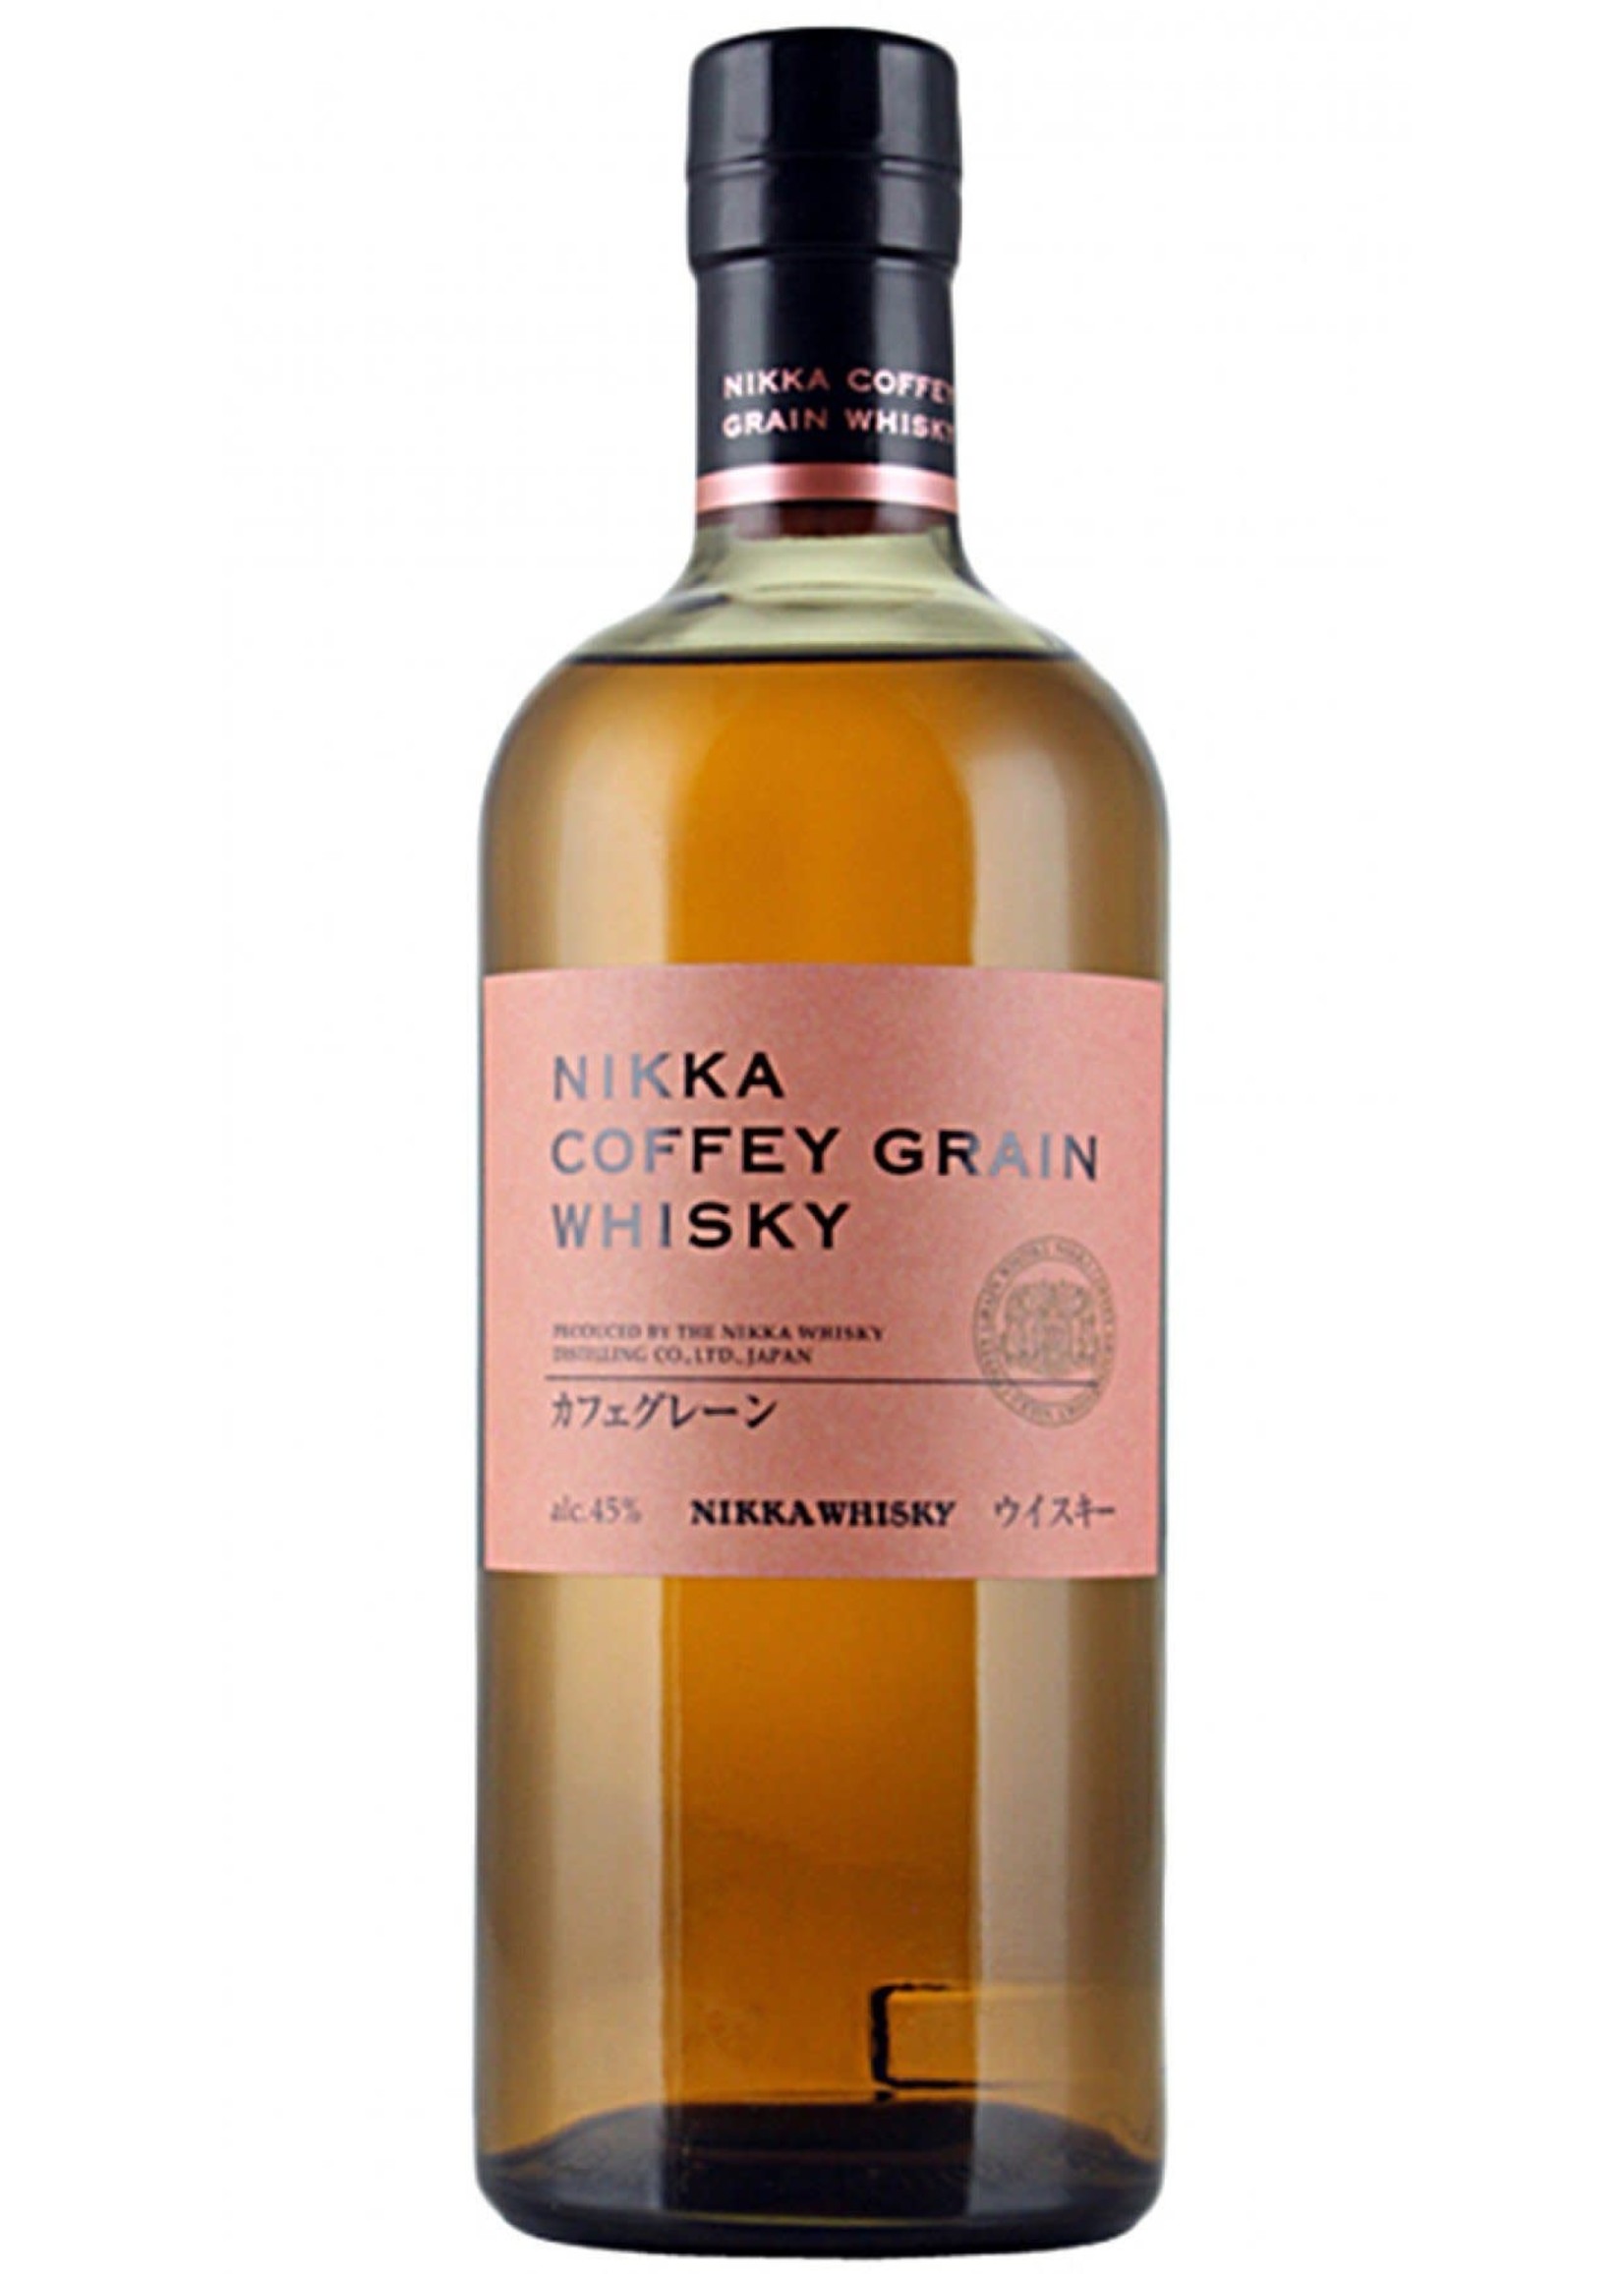 Nikka Gold and Gold Review — The Whisky Study